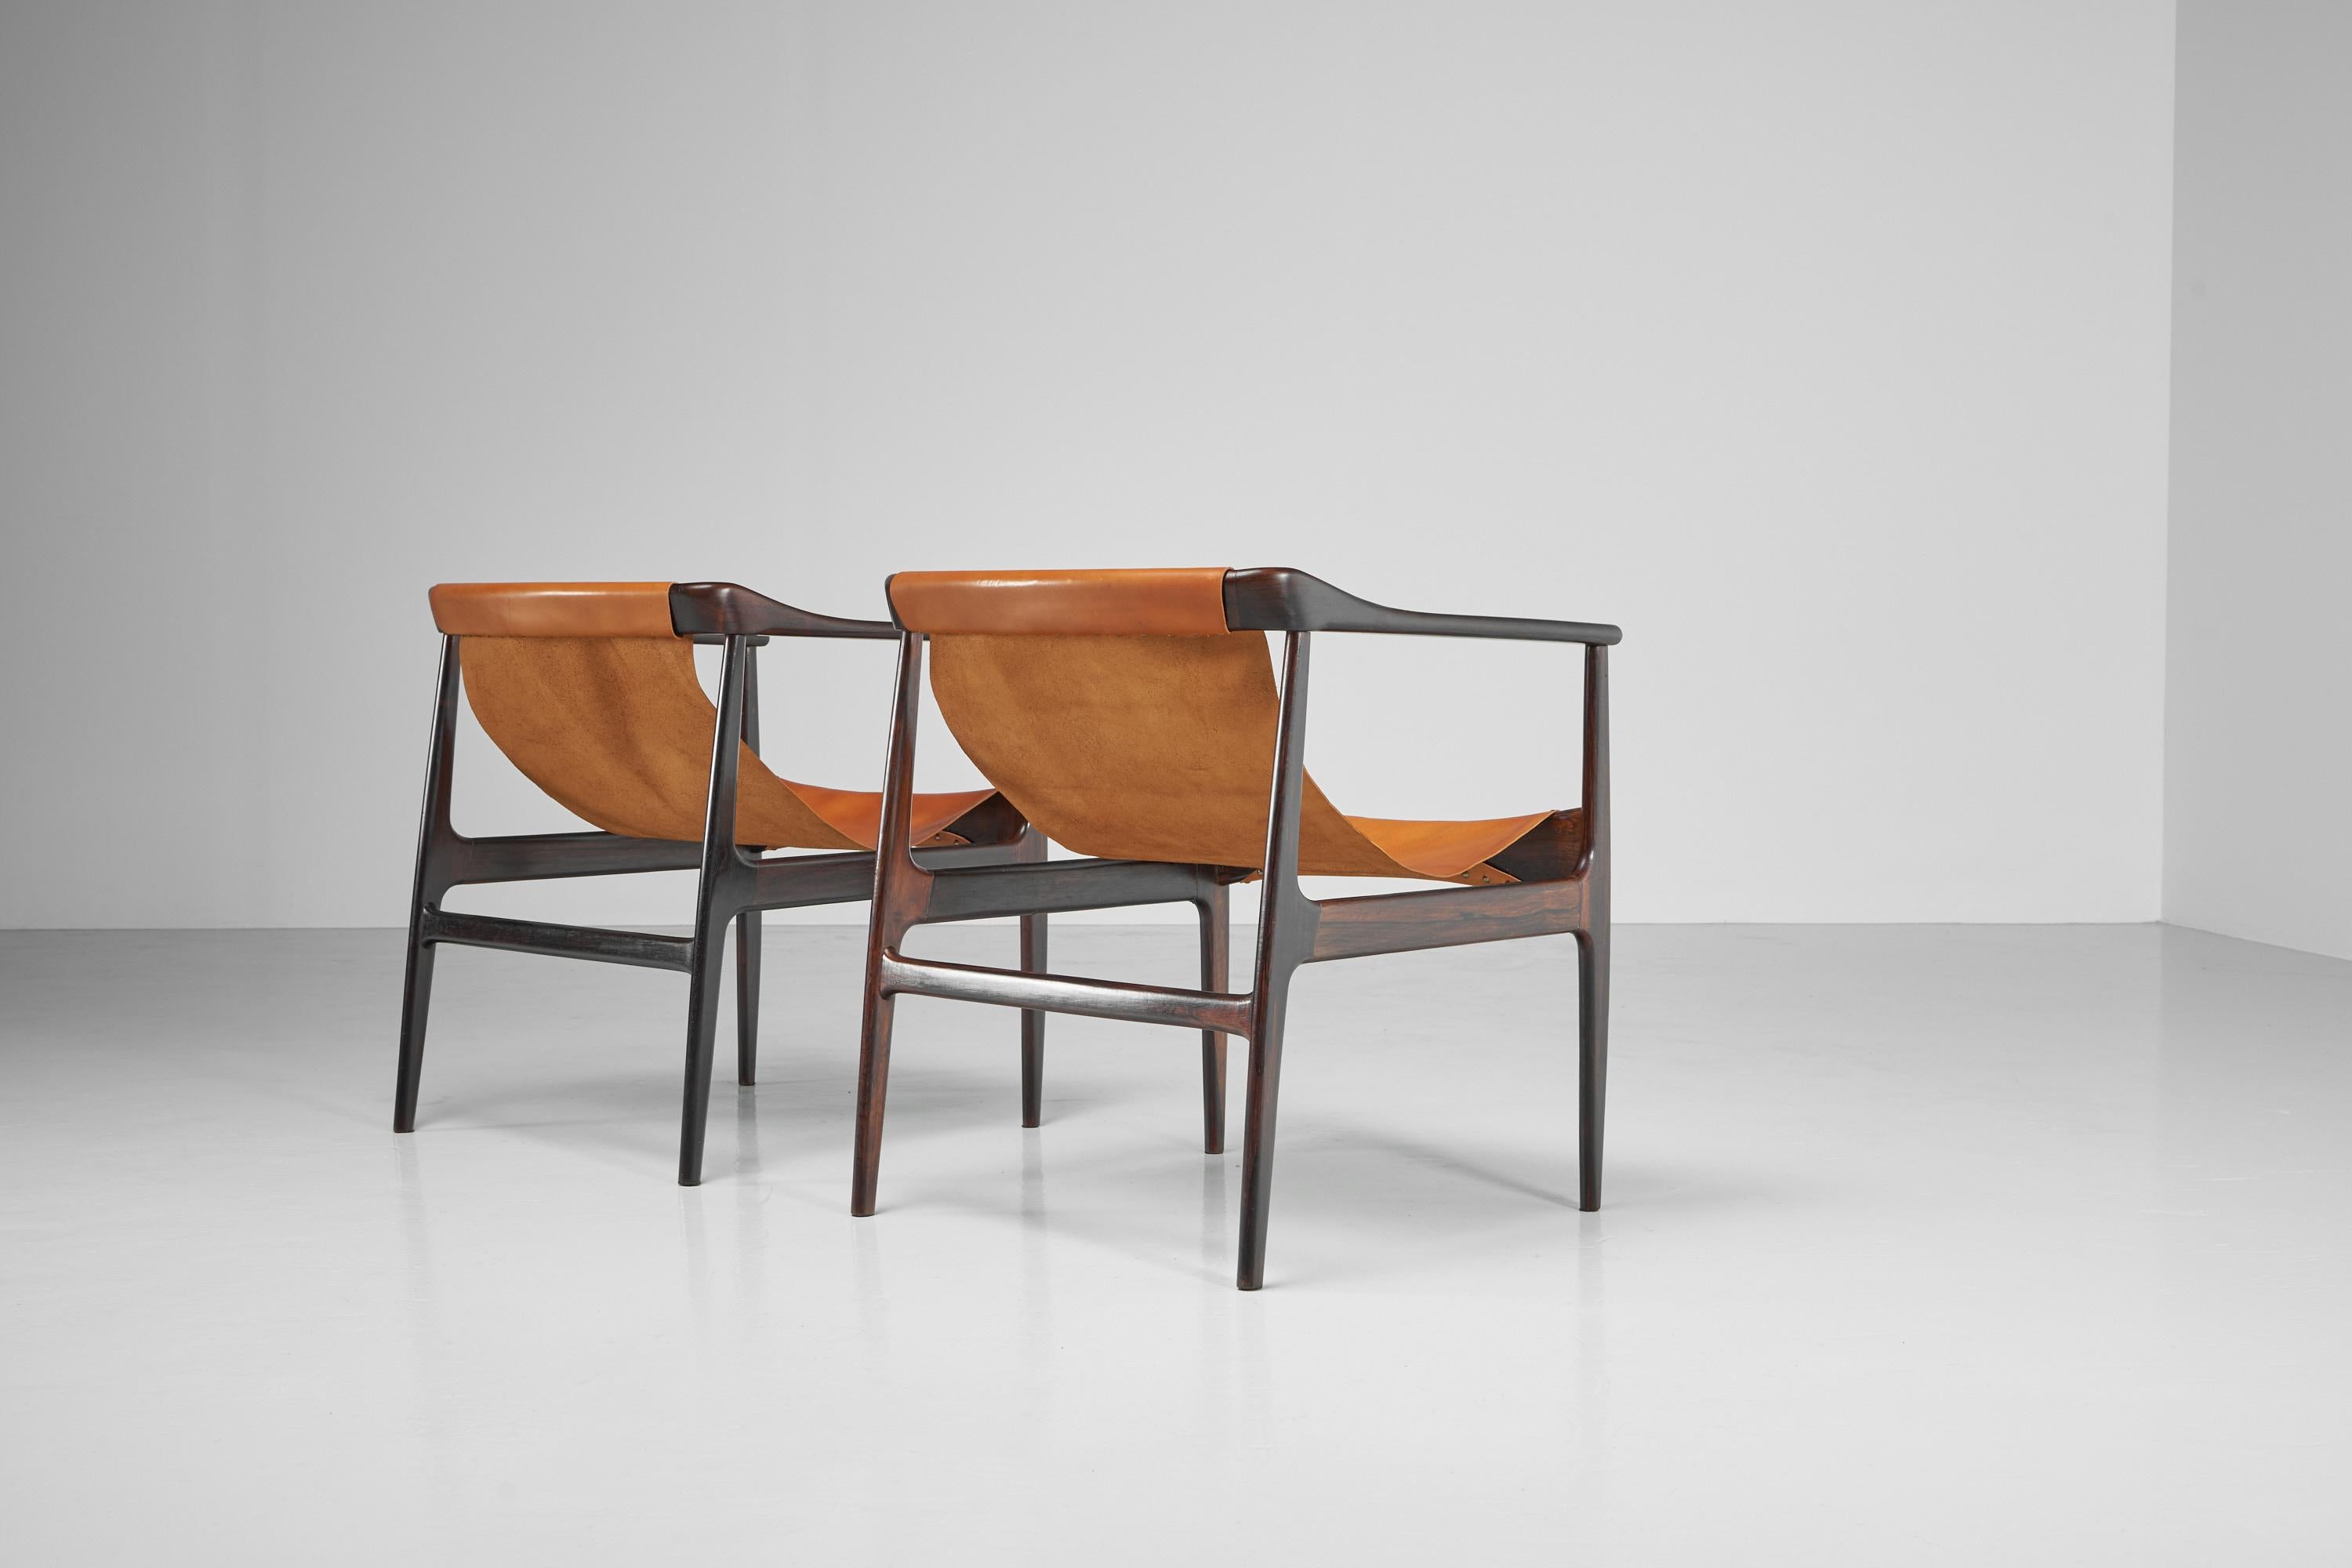 Liceu De Artes E Oficios Arm Chairs Pair, Brazil, 1960 In Excellent Condition For Sale In Roosendaal, Noord Brabant